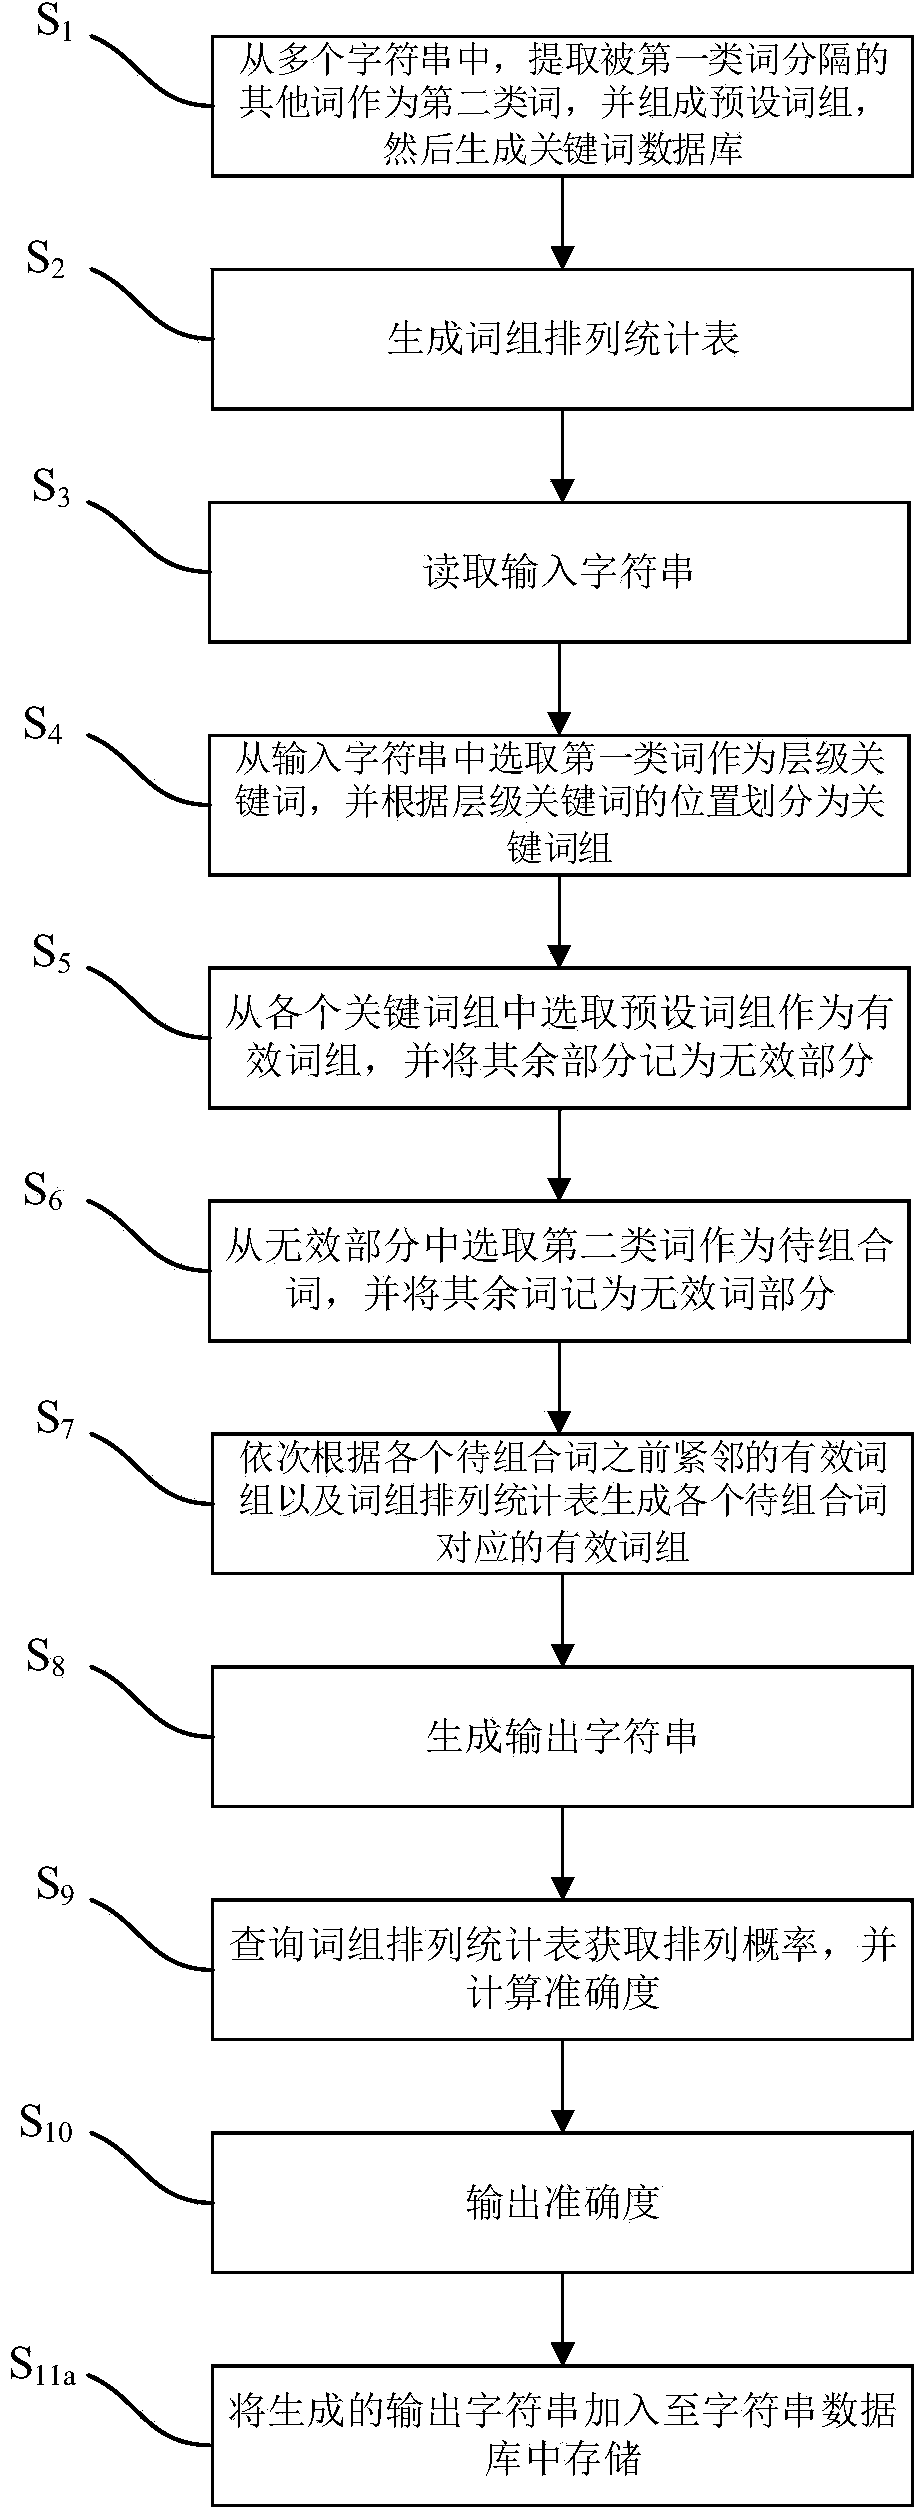 Method and system for automatically correcting character strings